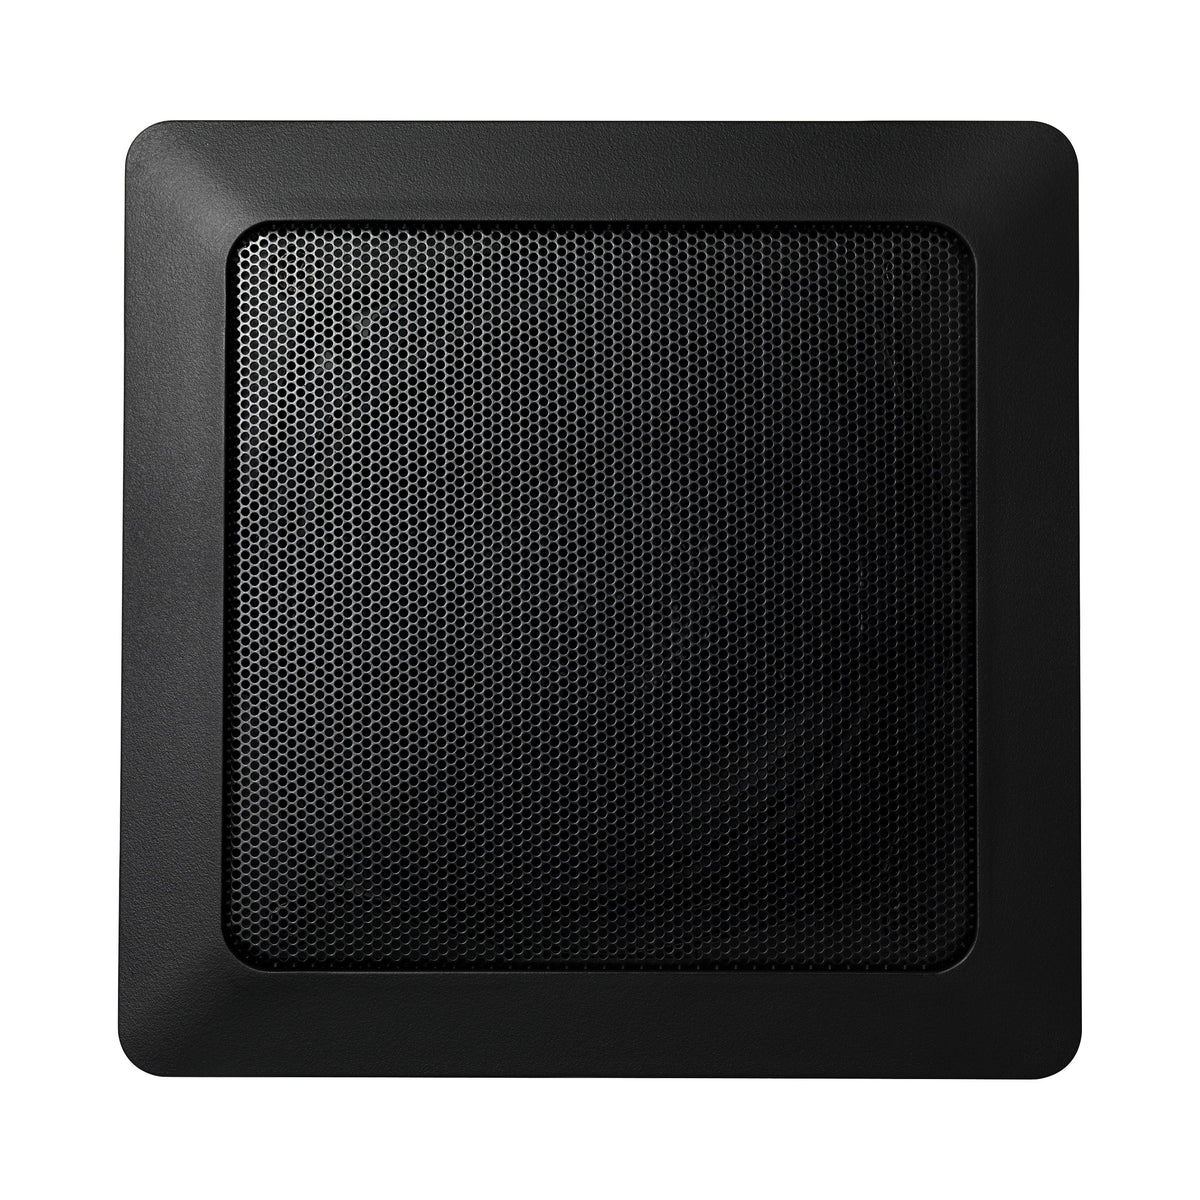 Mr. Steam MusicTherapy® Square Audio Speakers With Powerful Bass